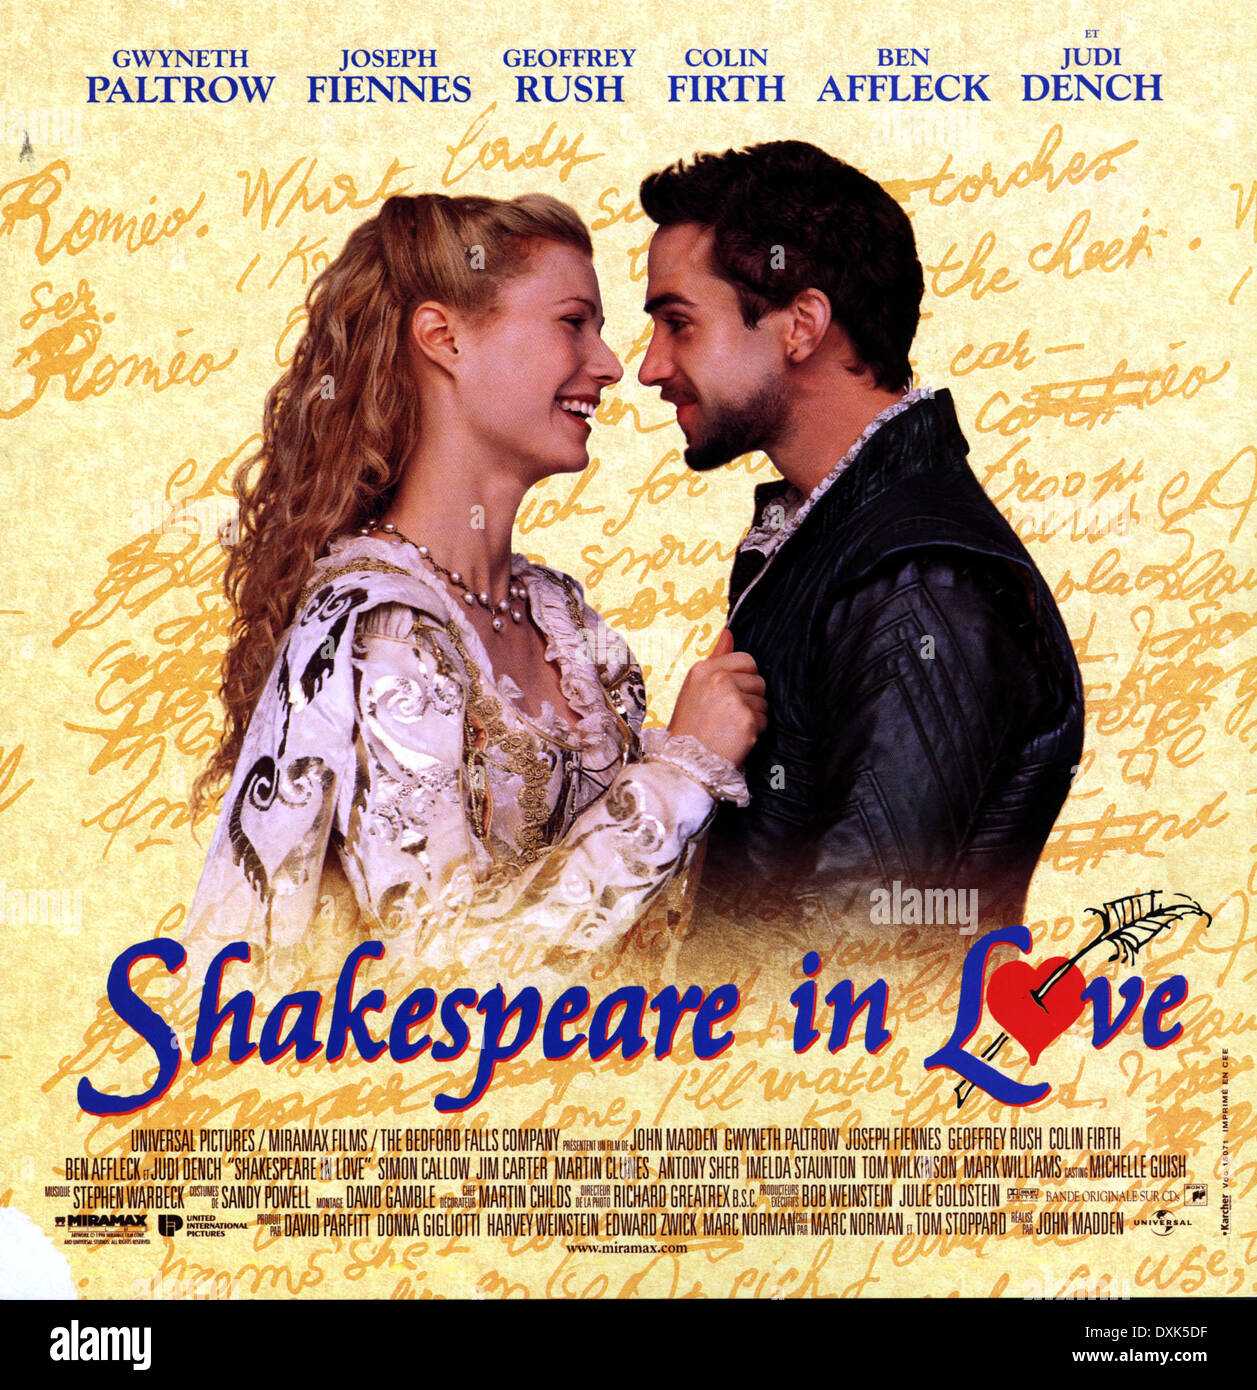 SHAKESPEARE IN LOVE (US/BR 1998) Banque D'Images